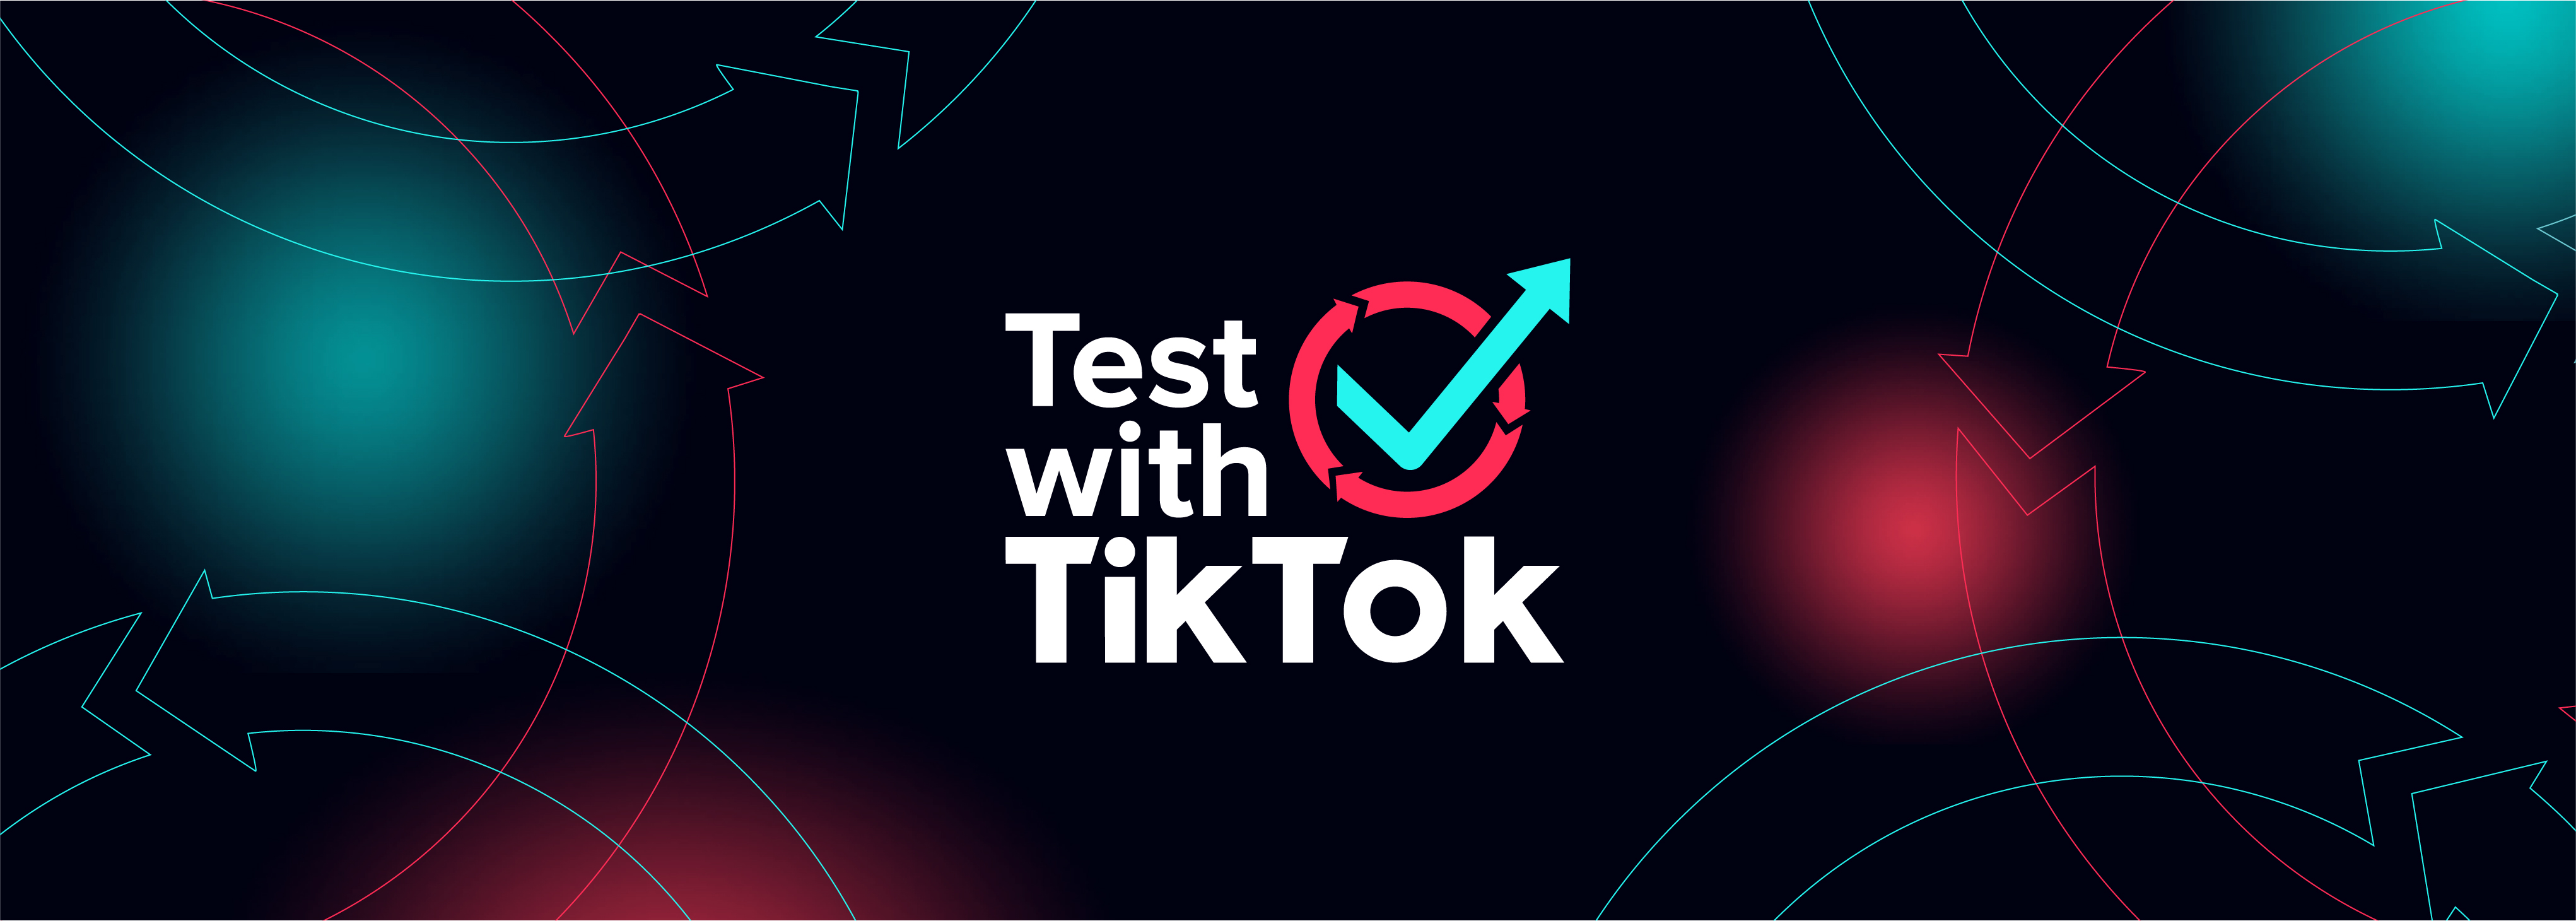 BA Test with TikTok: Scale Up Your Campaigns with Automation